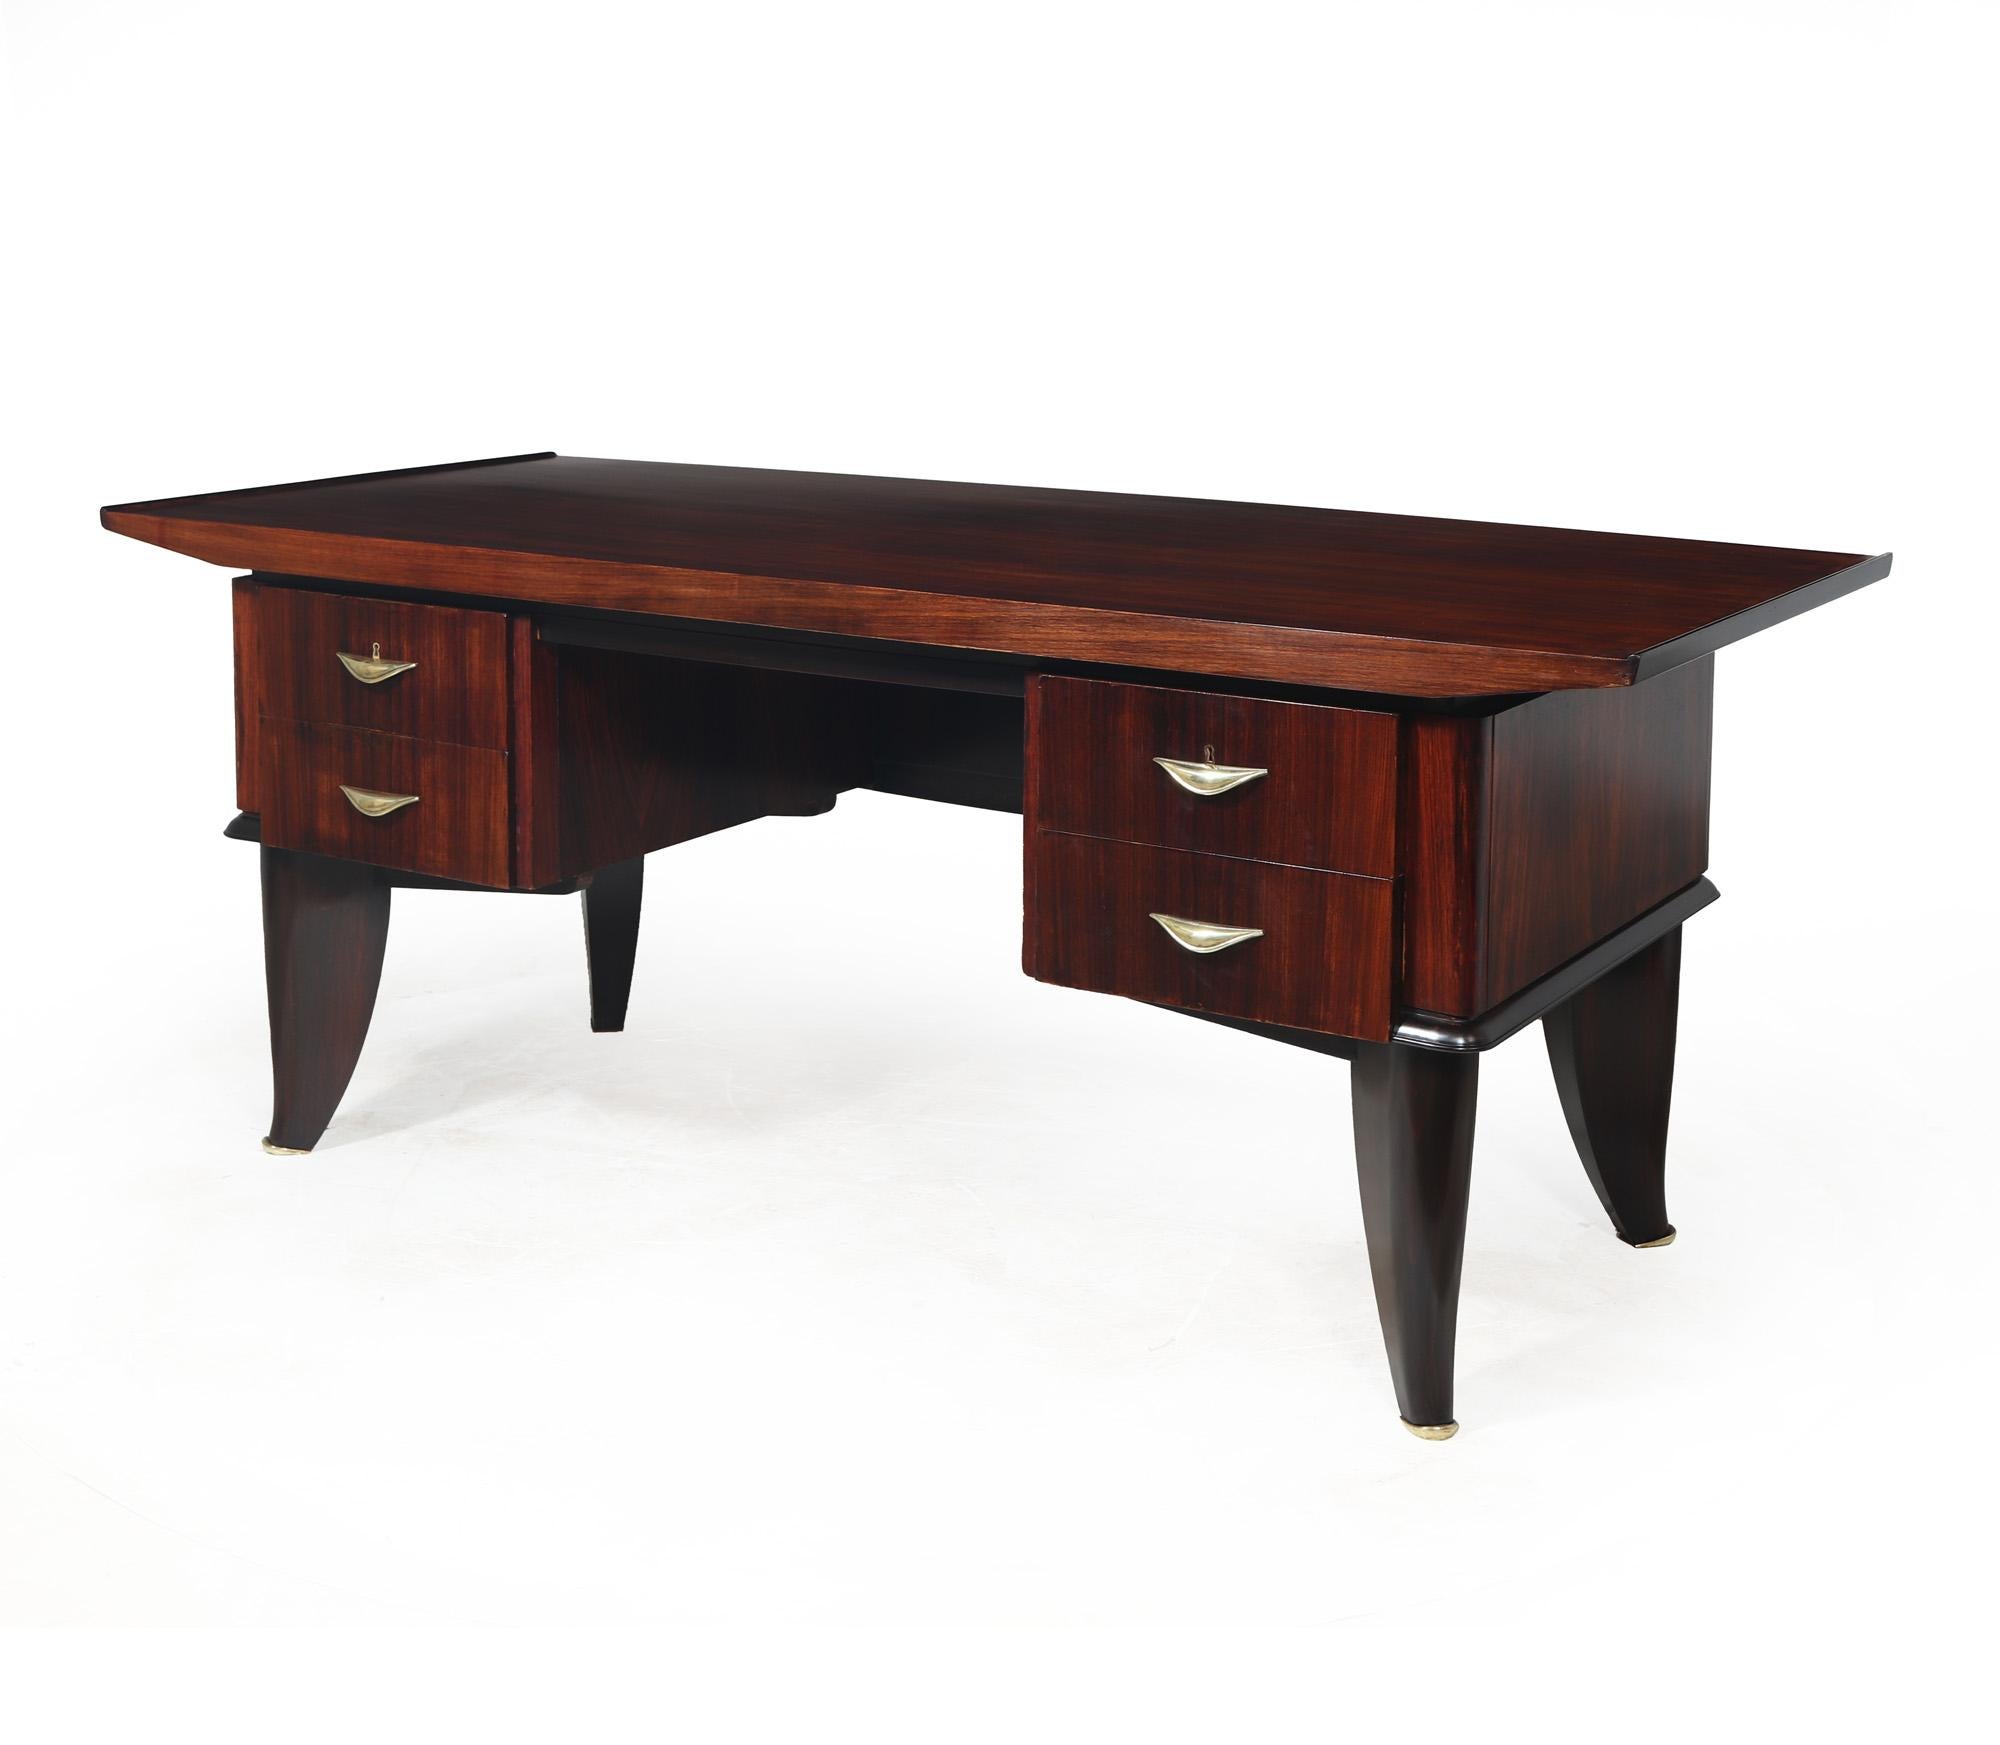 ART DECO DESK
A stunning French Art Deco desk produced in Paris in 1930 by Sanyas et Popot ,this example has been crafted from oak and rosewood designed with a curved top section. It has four lockable drawers, all adorned with art deco bronze